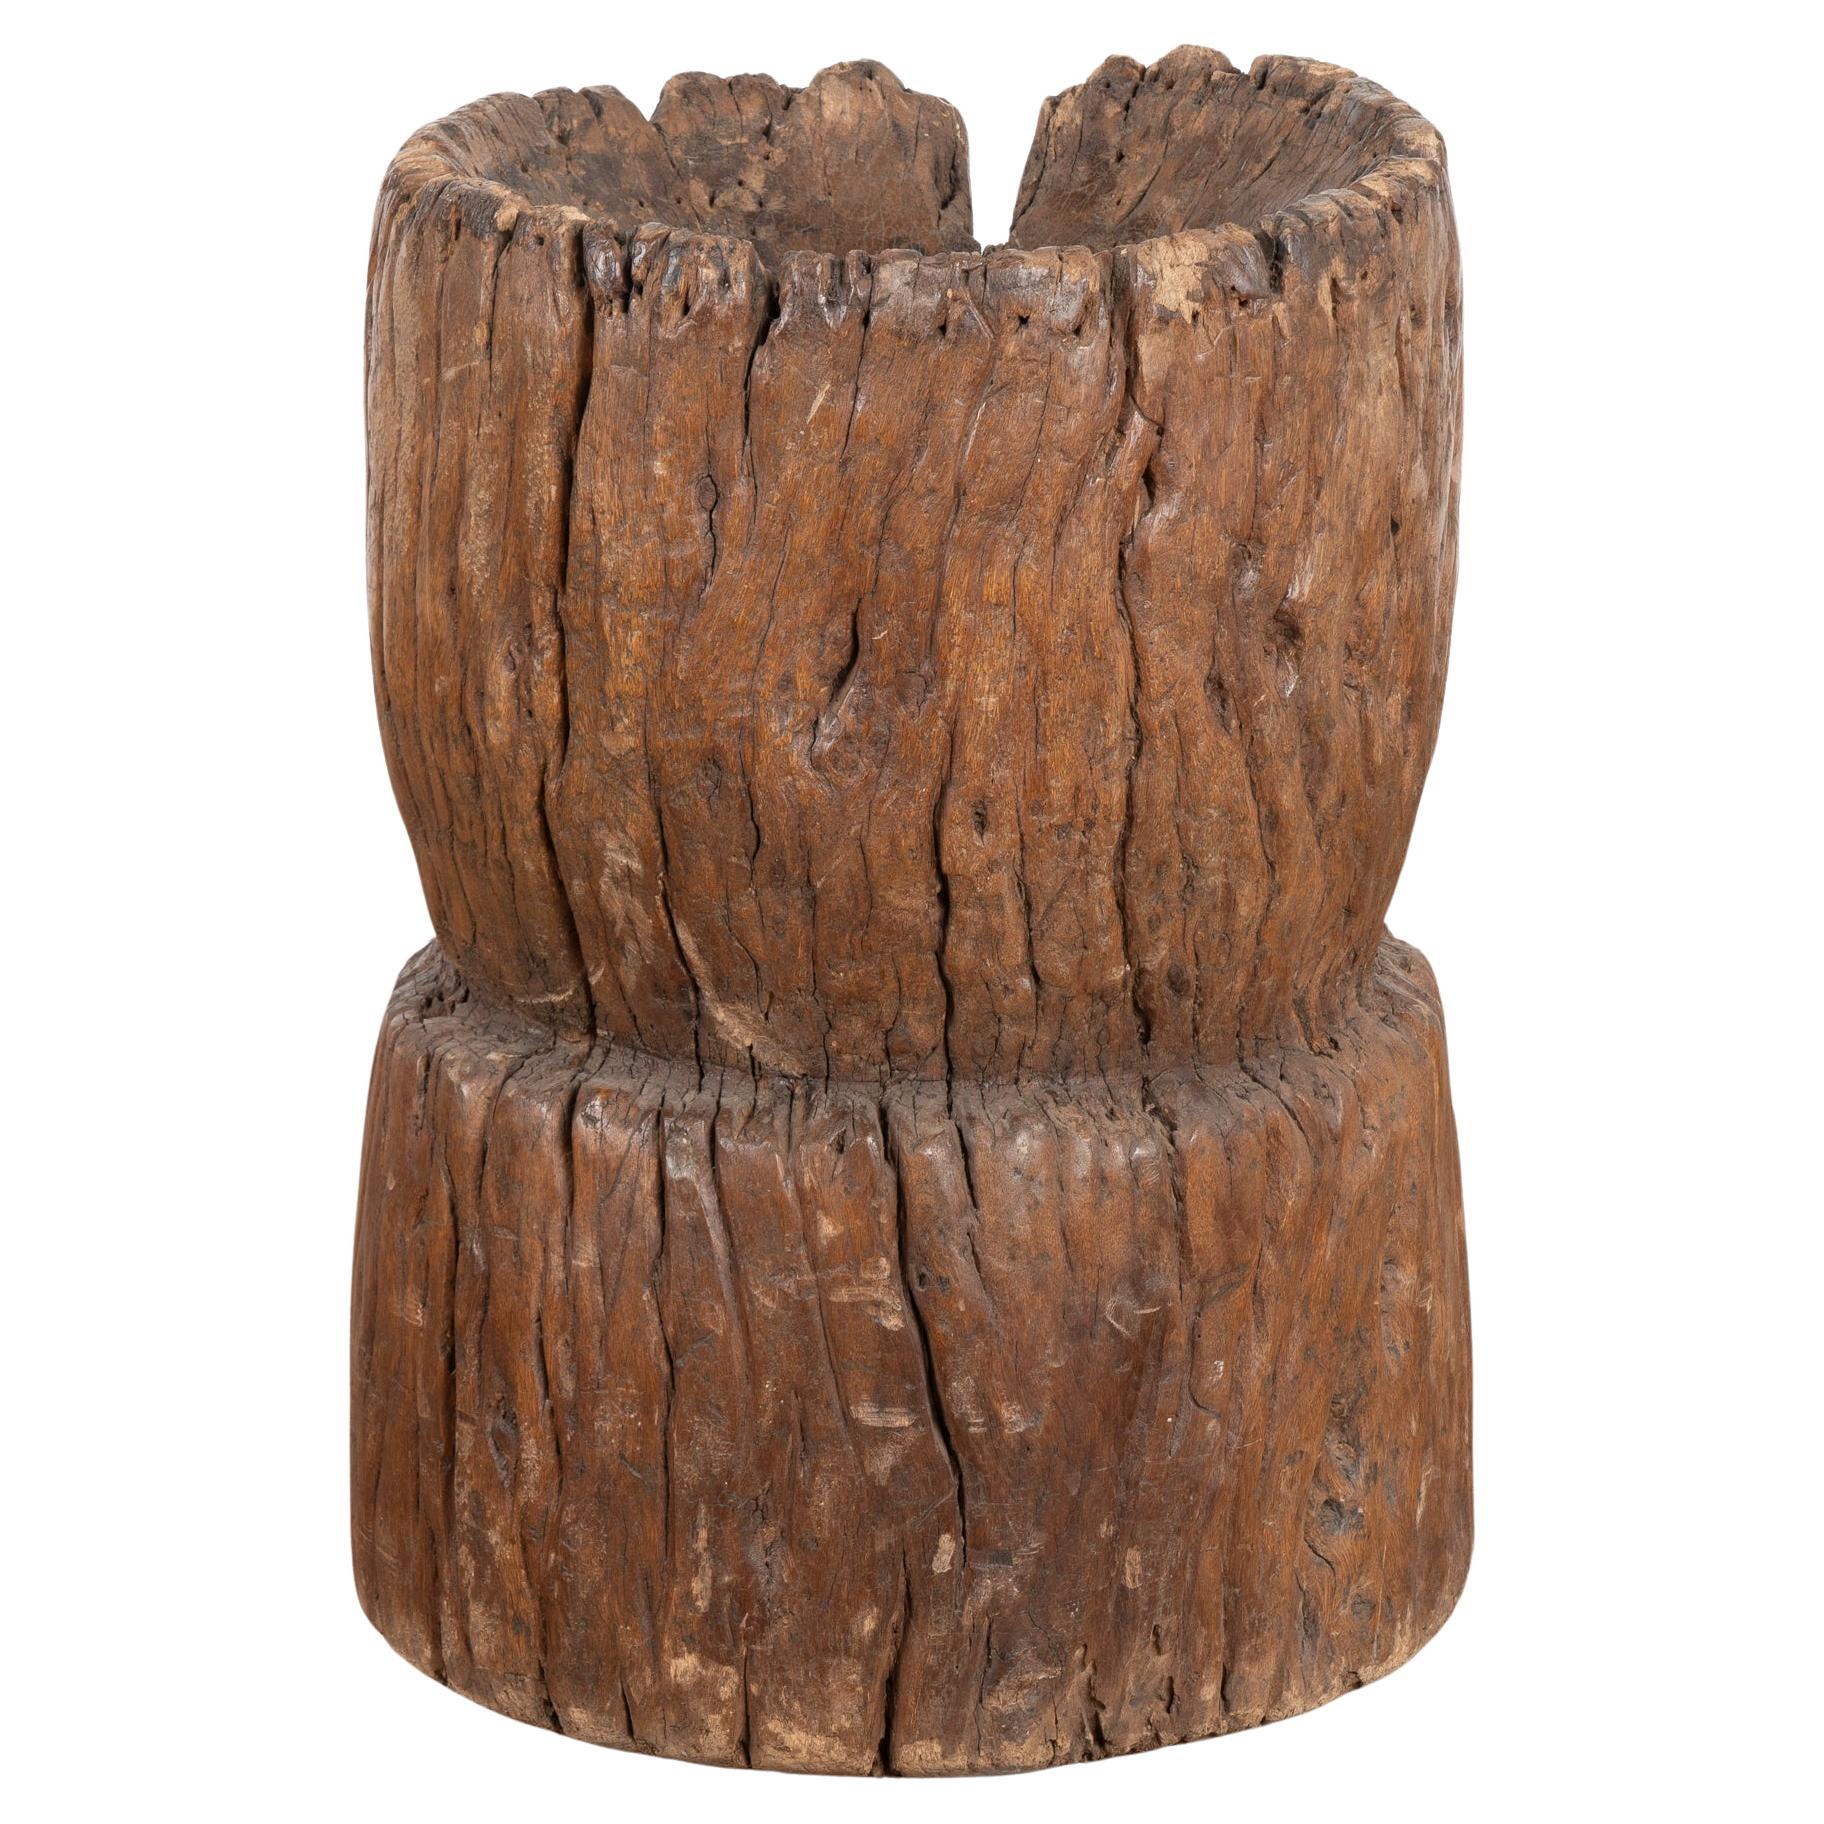 Wood Sculpture Container from Old Water Mill Gear, China 1820-40 For Sale